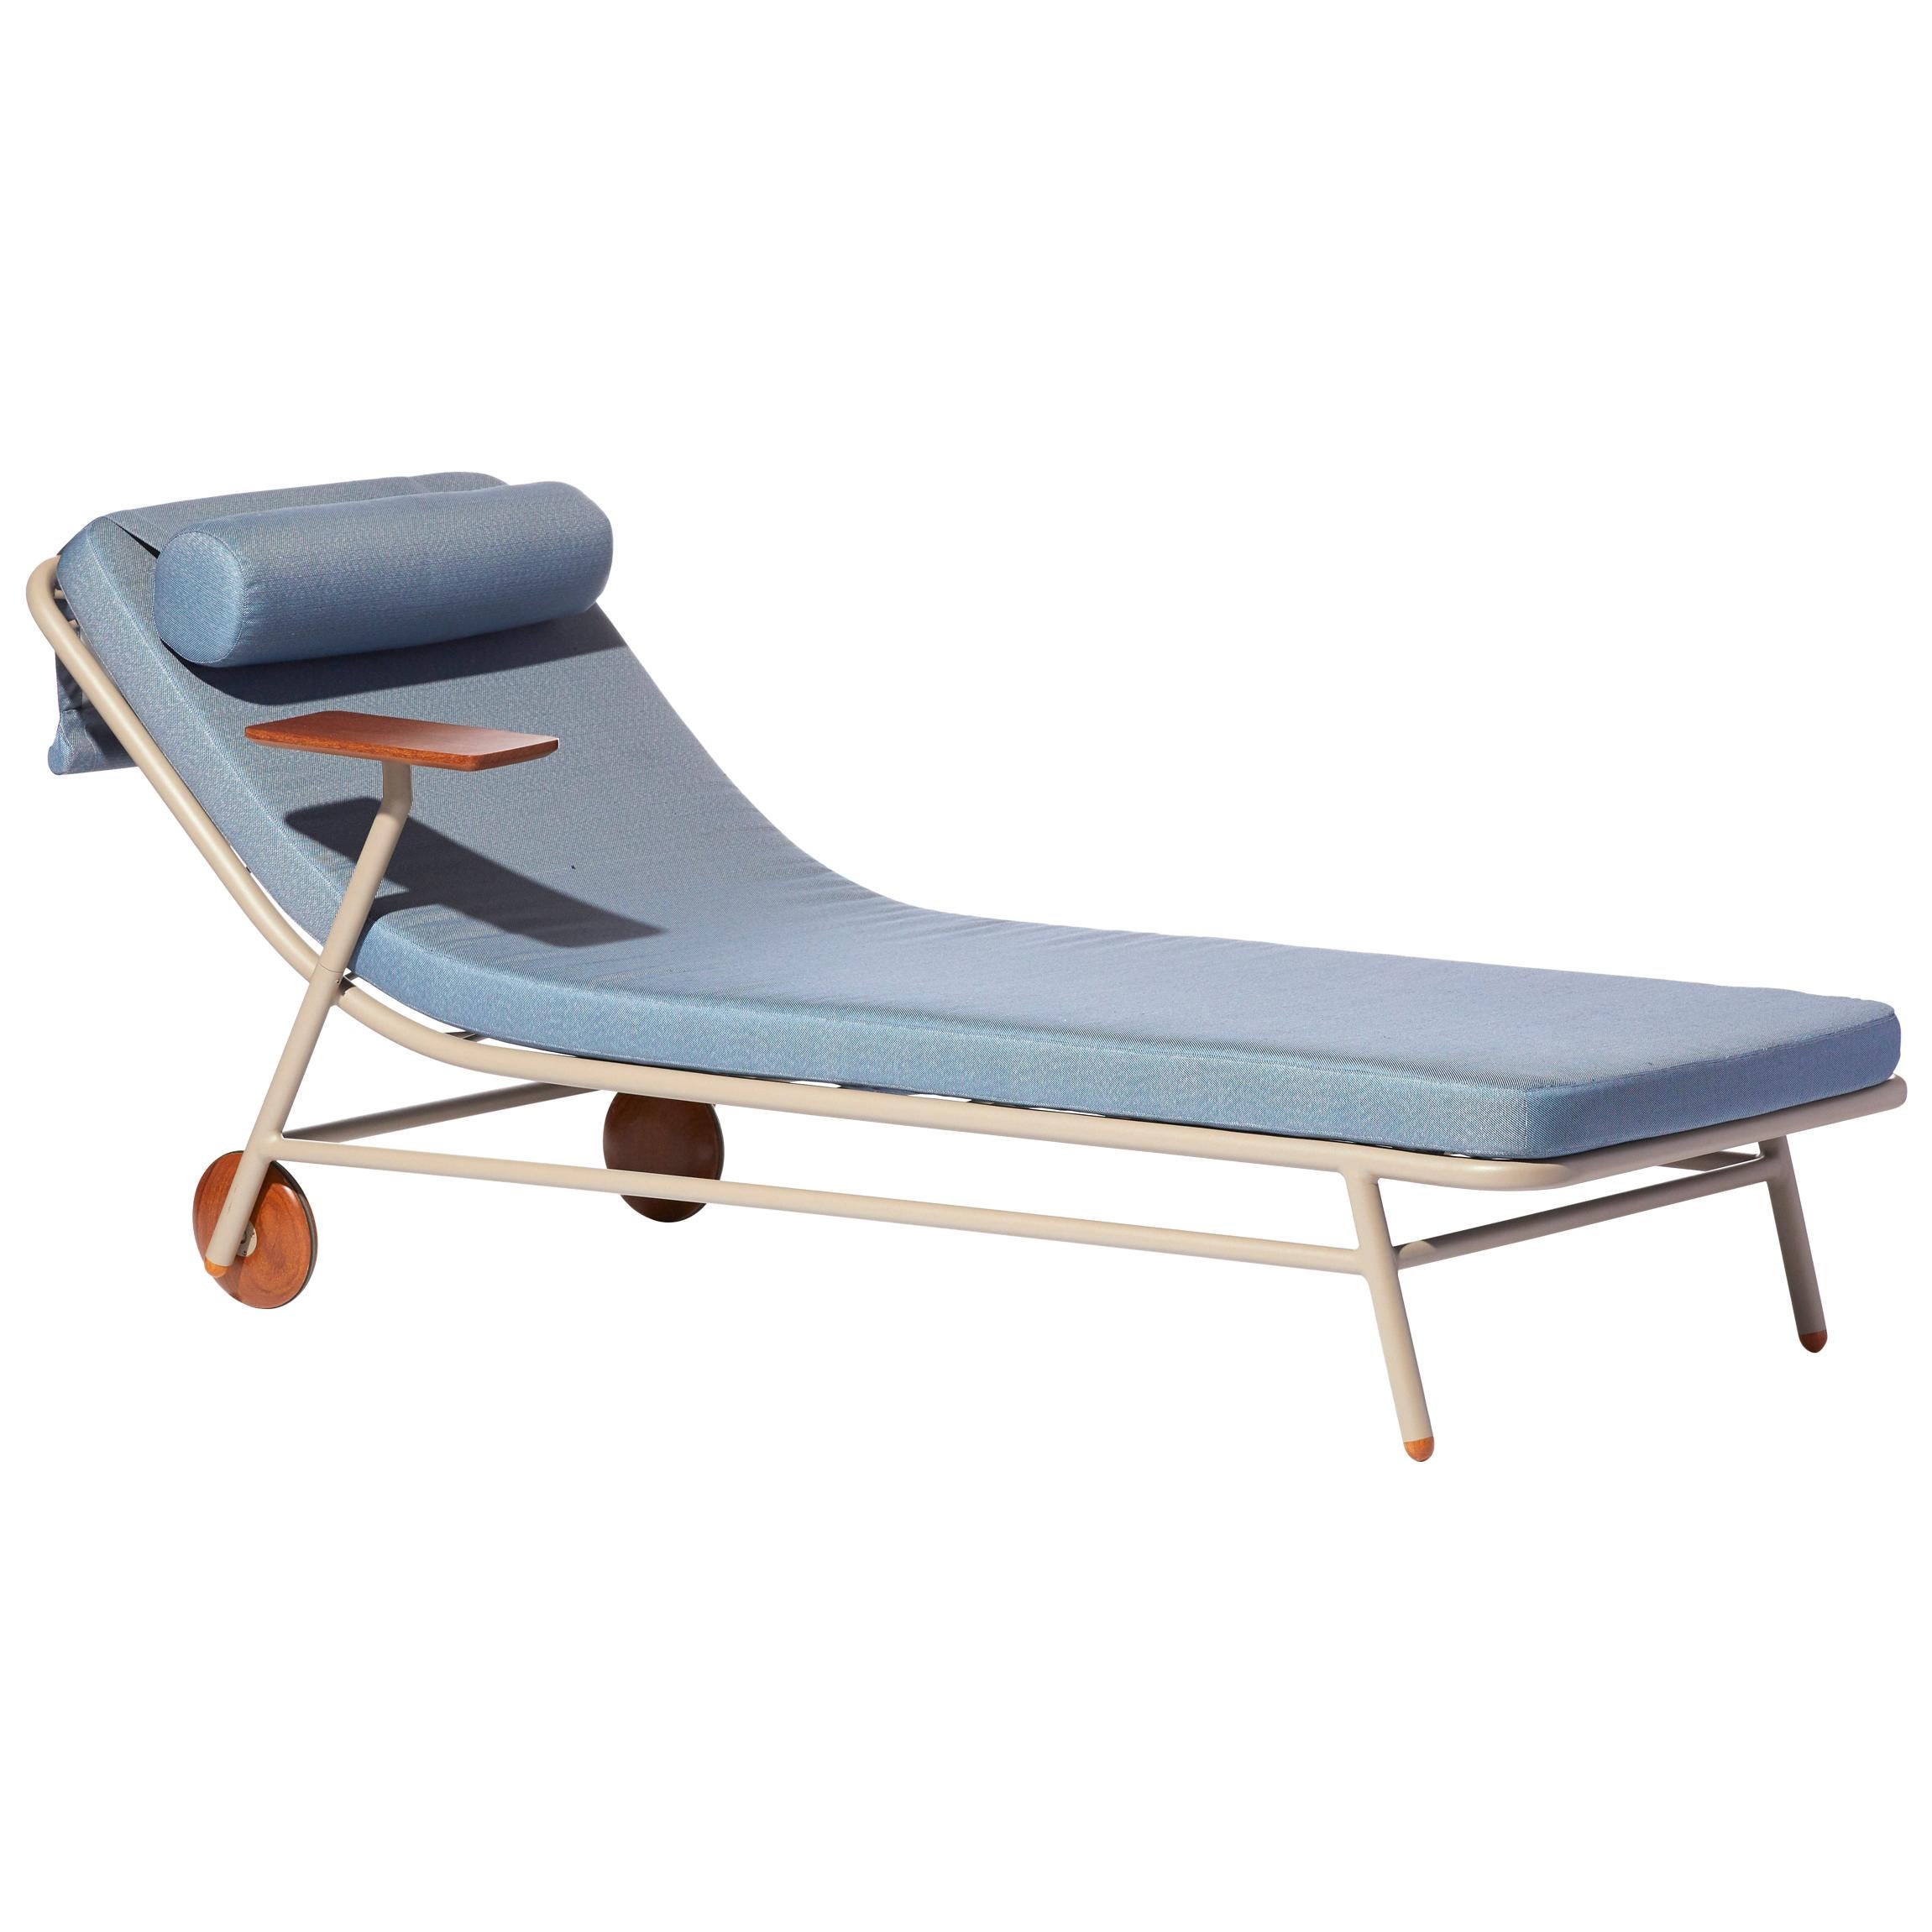 Contemporary Outdoor chaise lounge, Aluminum and Wood, Bask